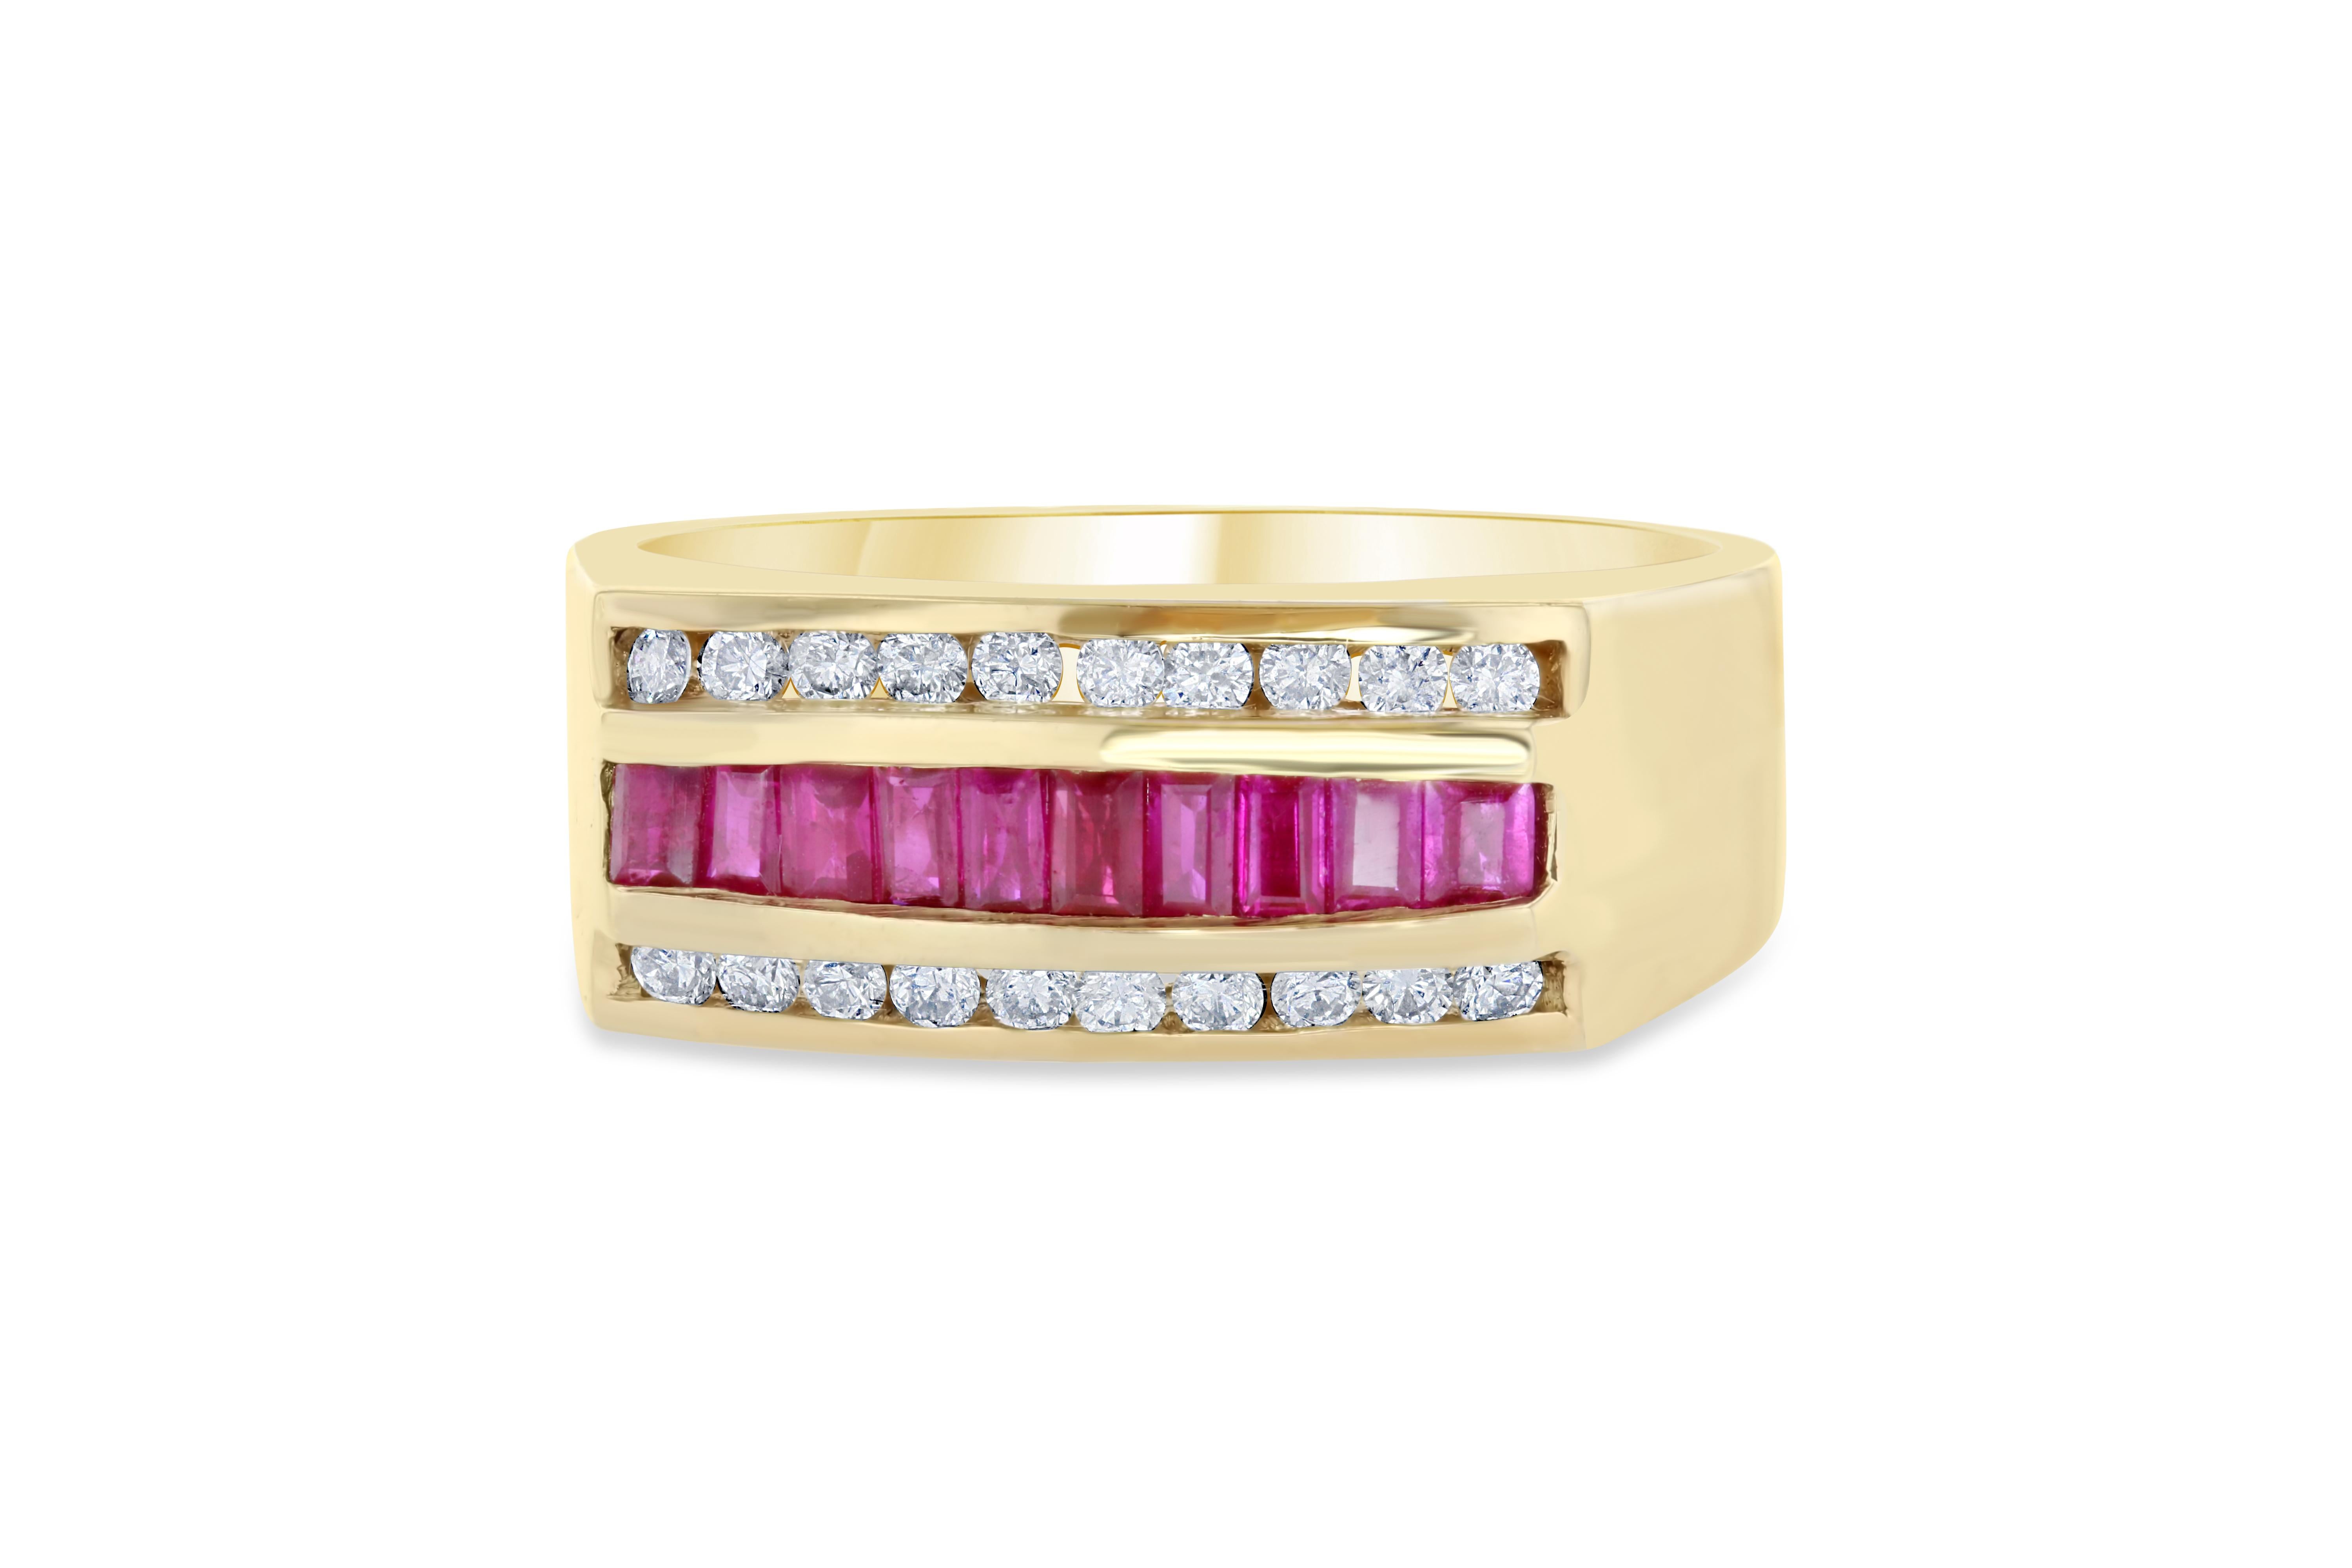 We also carry a Mens' Collection! 
This unique Mens' Ring is set with 10 Baguette Cut Rubies weighing 0.86 carats and is surrounded by 20 Round Cut Diamonds that weigh 0.37 carats. The Total Carat Weight of this ring is 1.23 Carats. It is crafted in